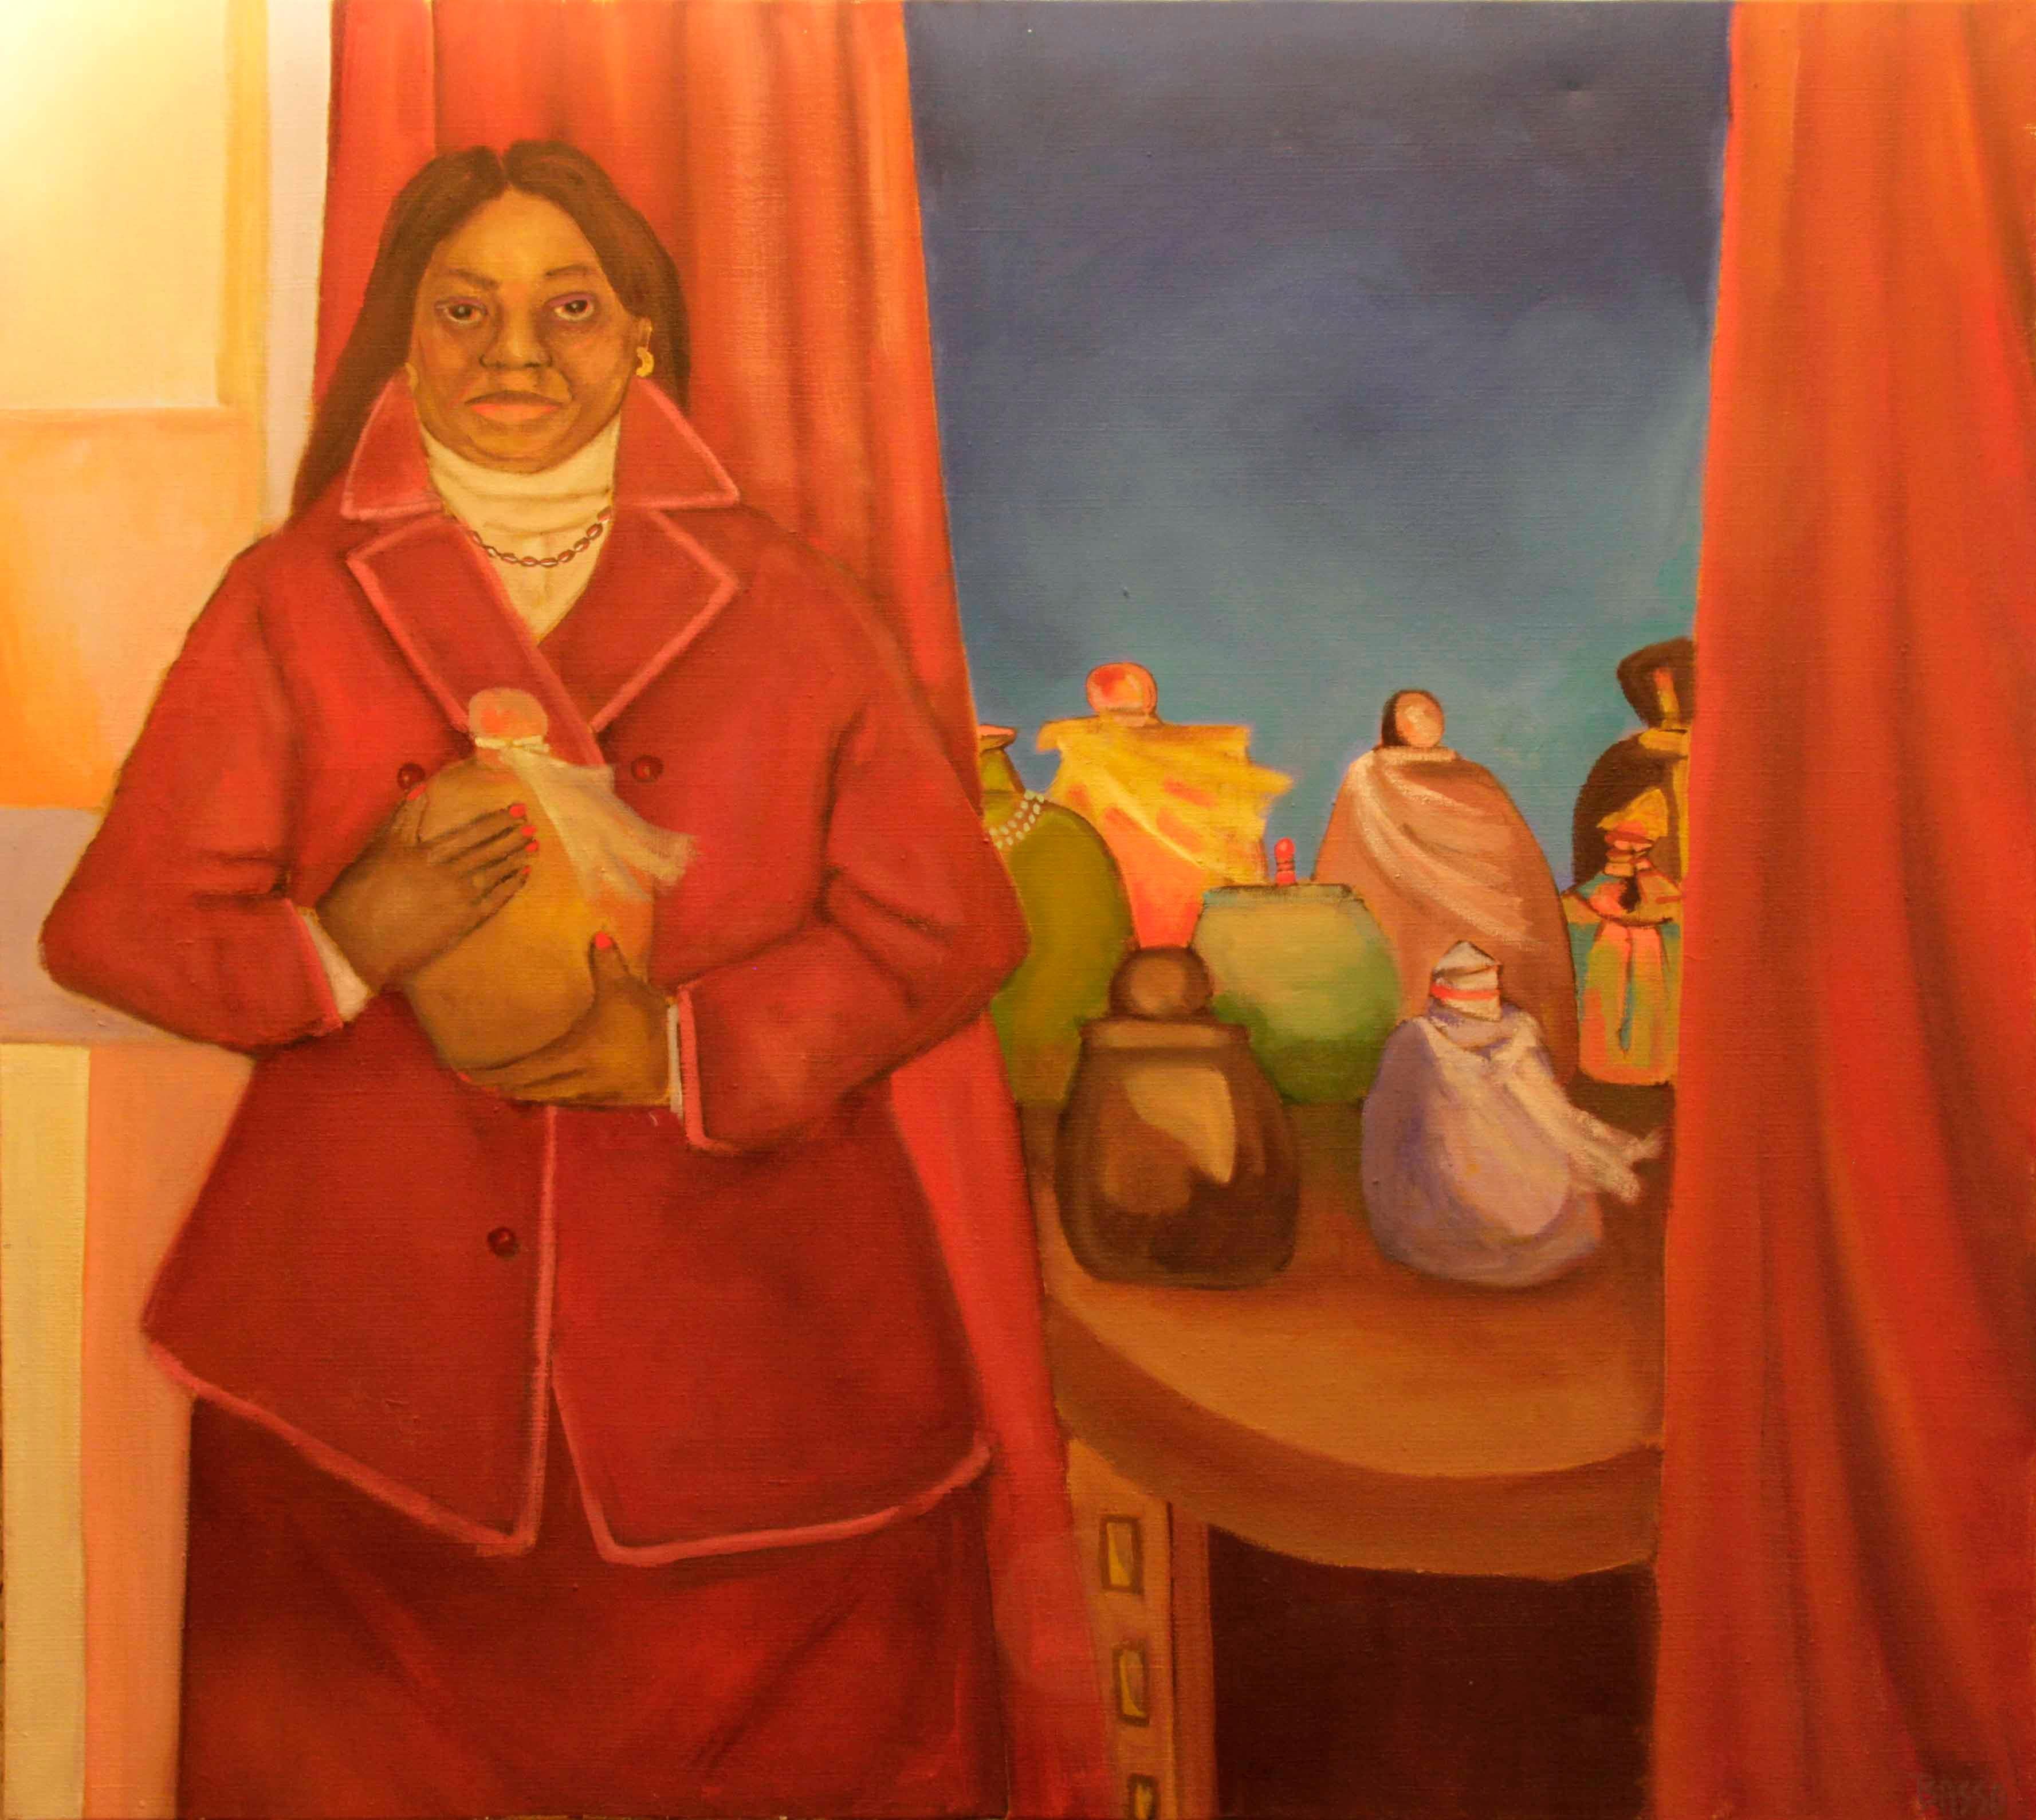 Stephen Basso Interior Painting - The Dust Collector religious theme female figure ceremonial objects, bright reds